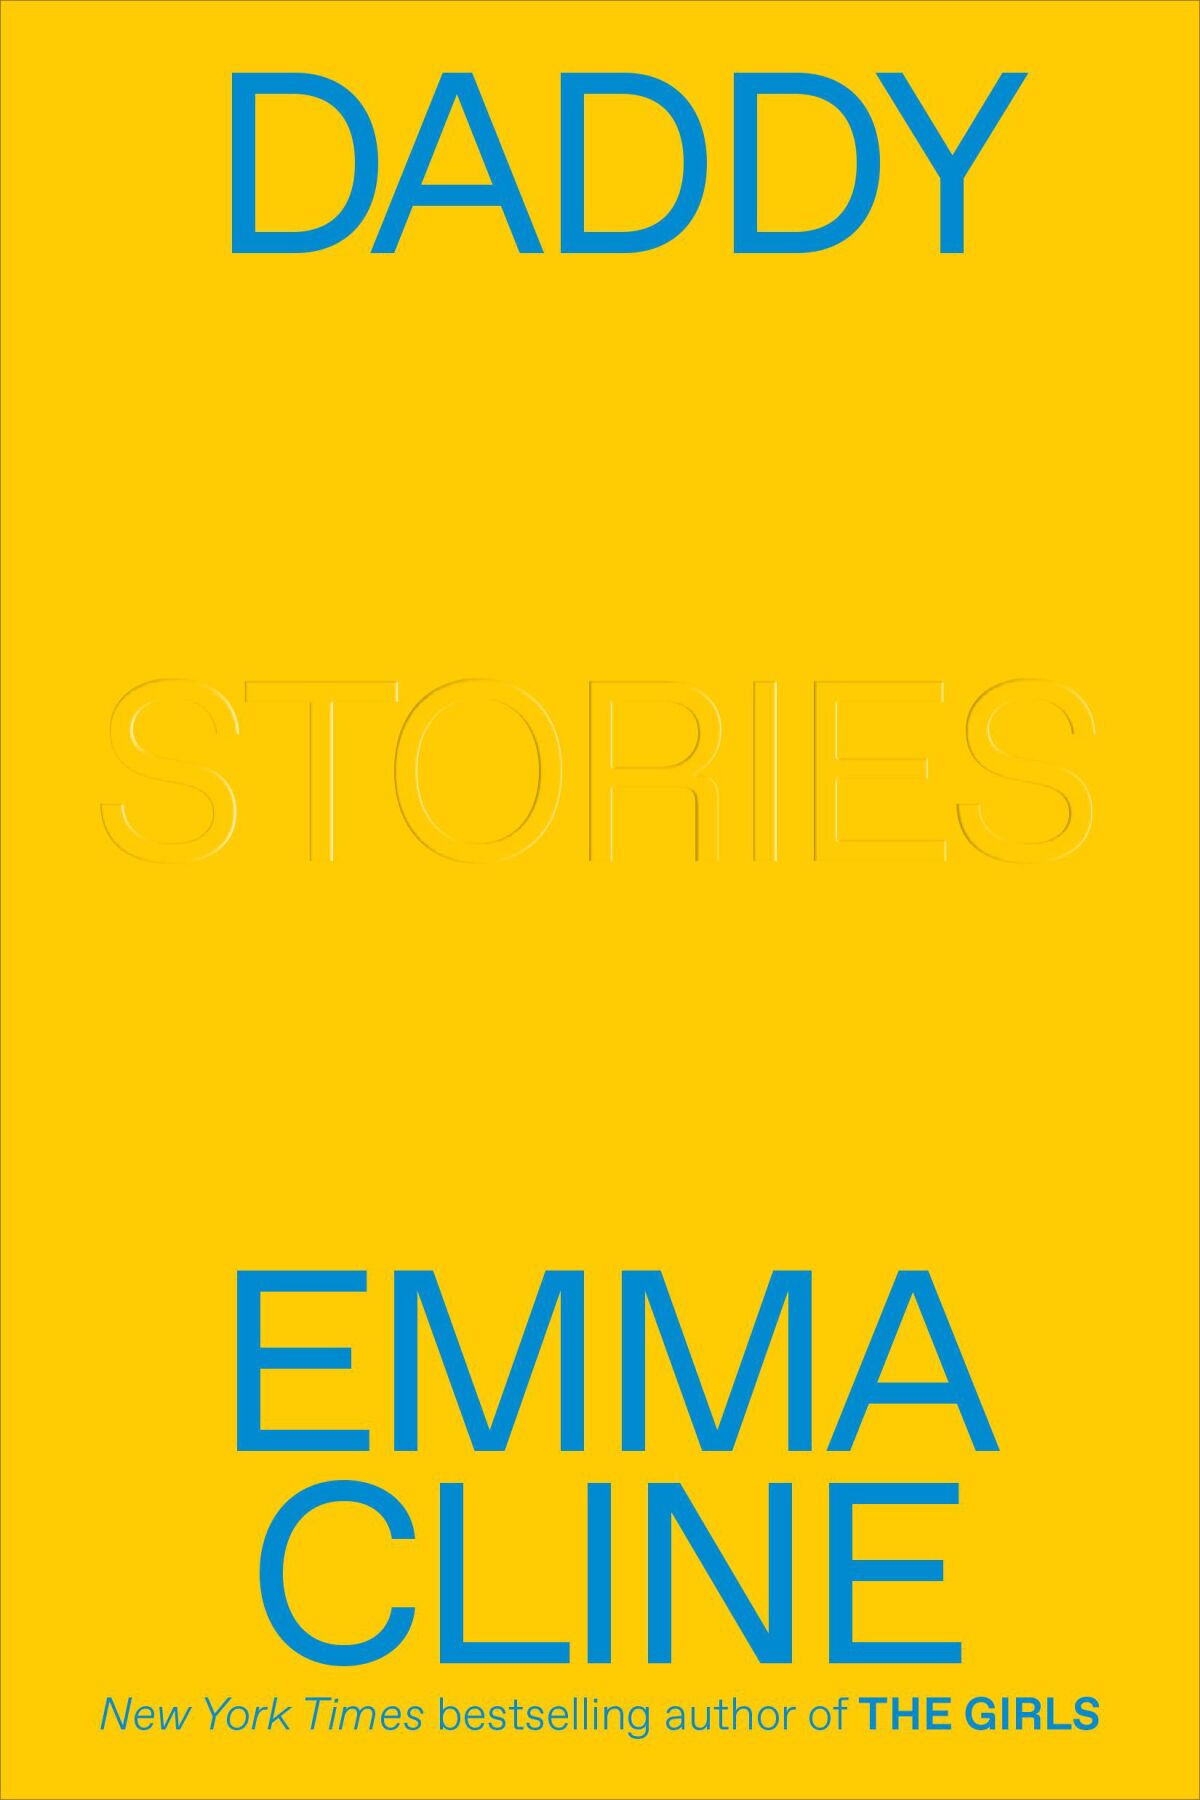 Book jacket for “Daddy: Stories” by Emma Cline.